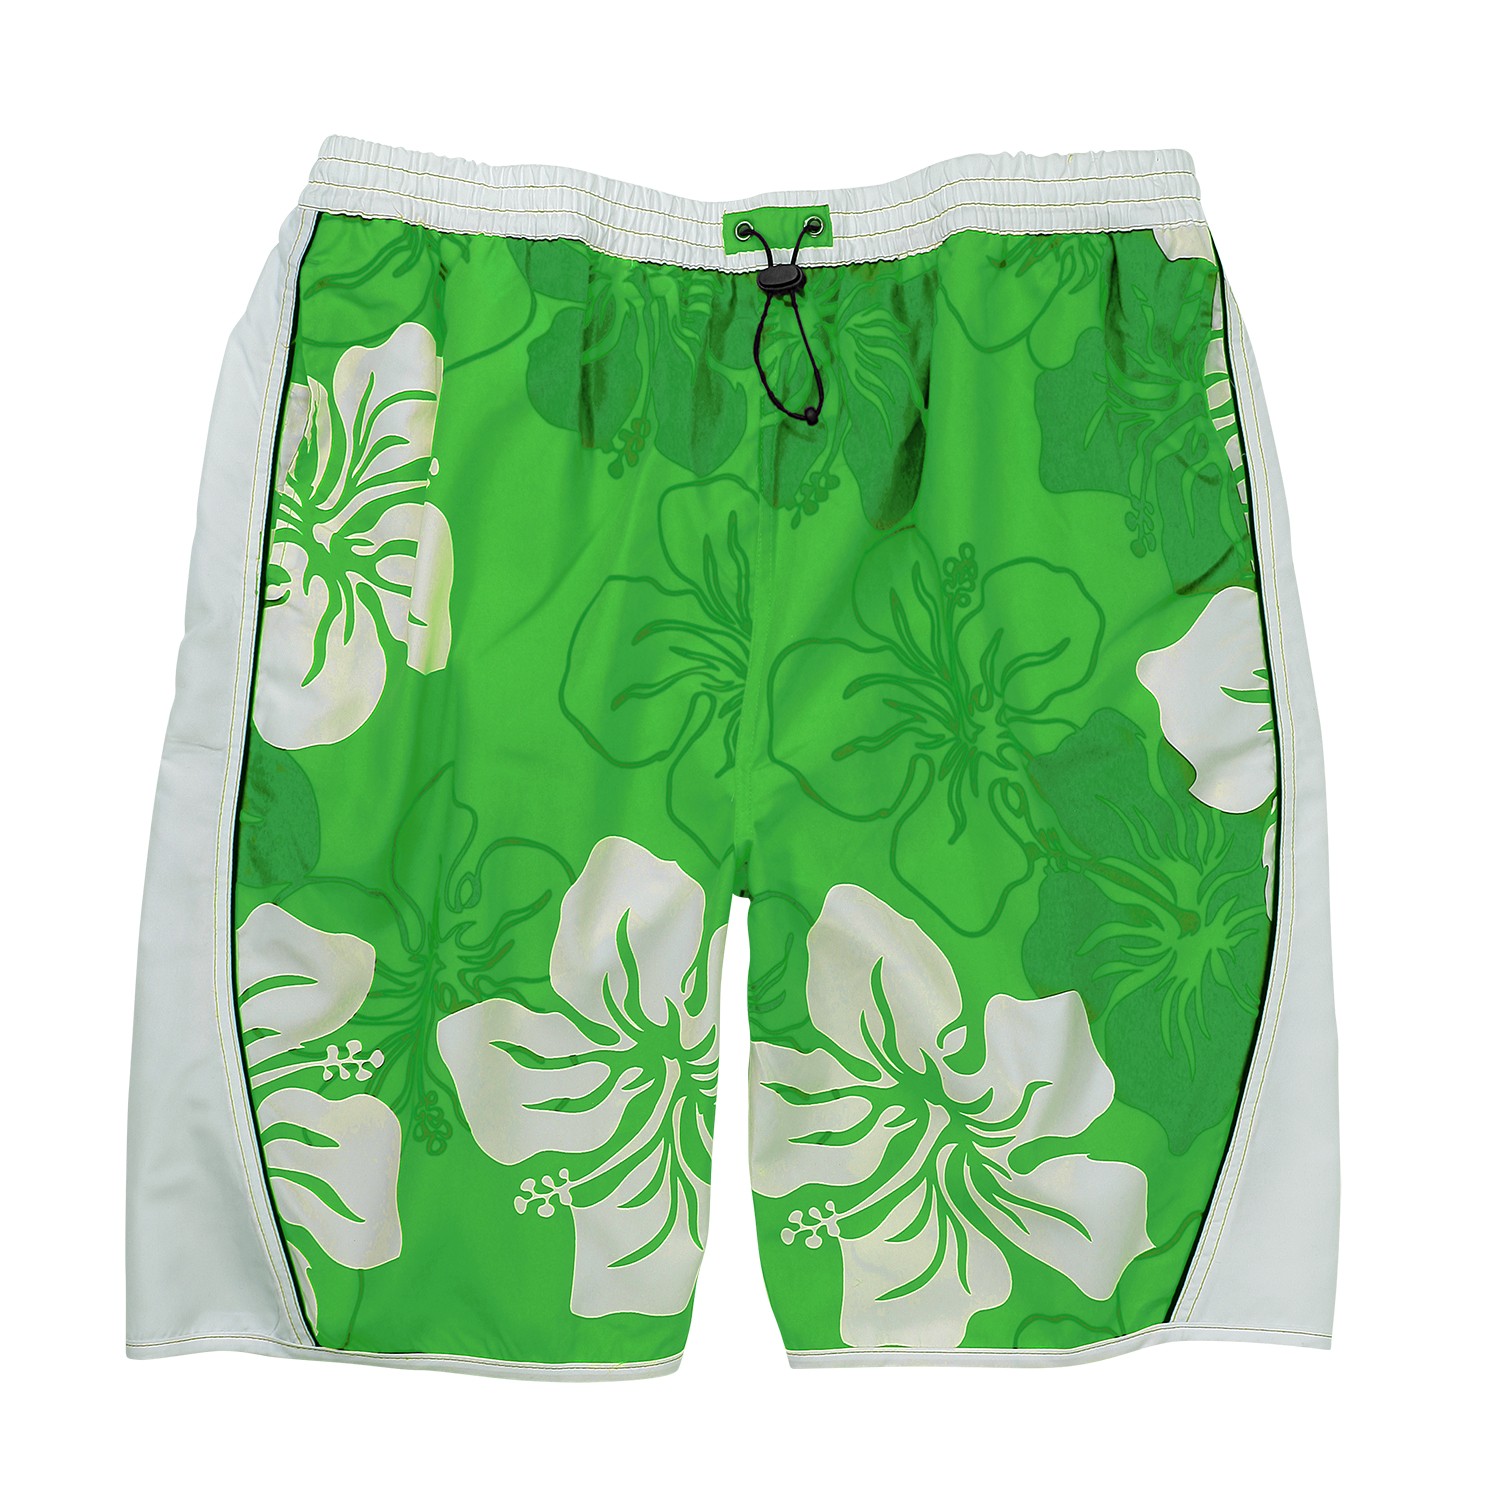 Swim bermuda by eleMar for men green-white patterned in oversizes up to 10XL